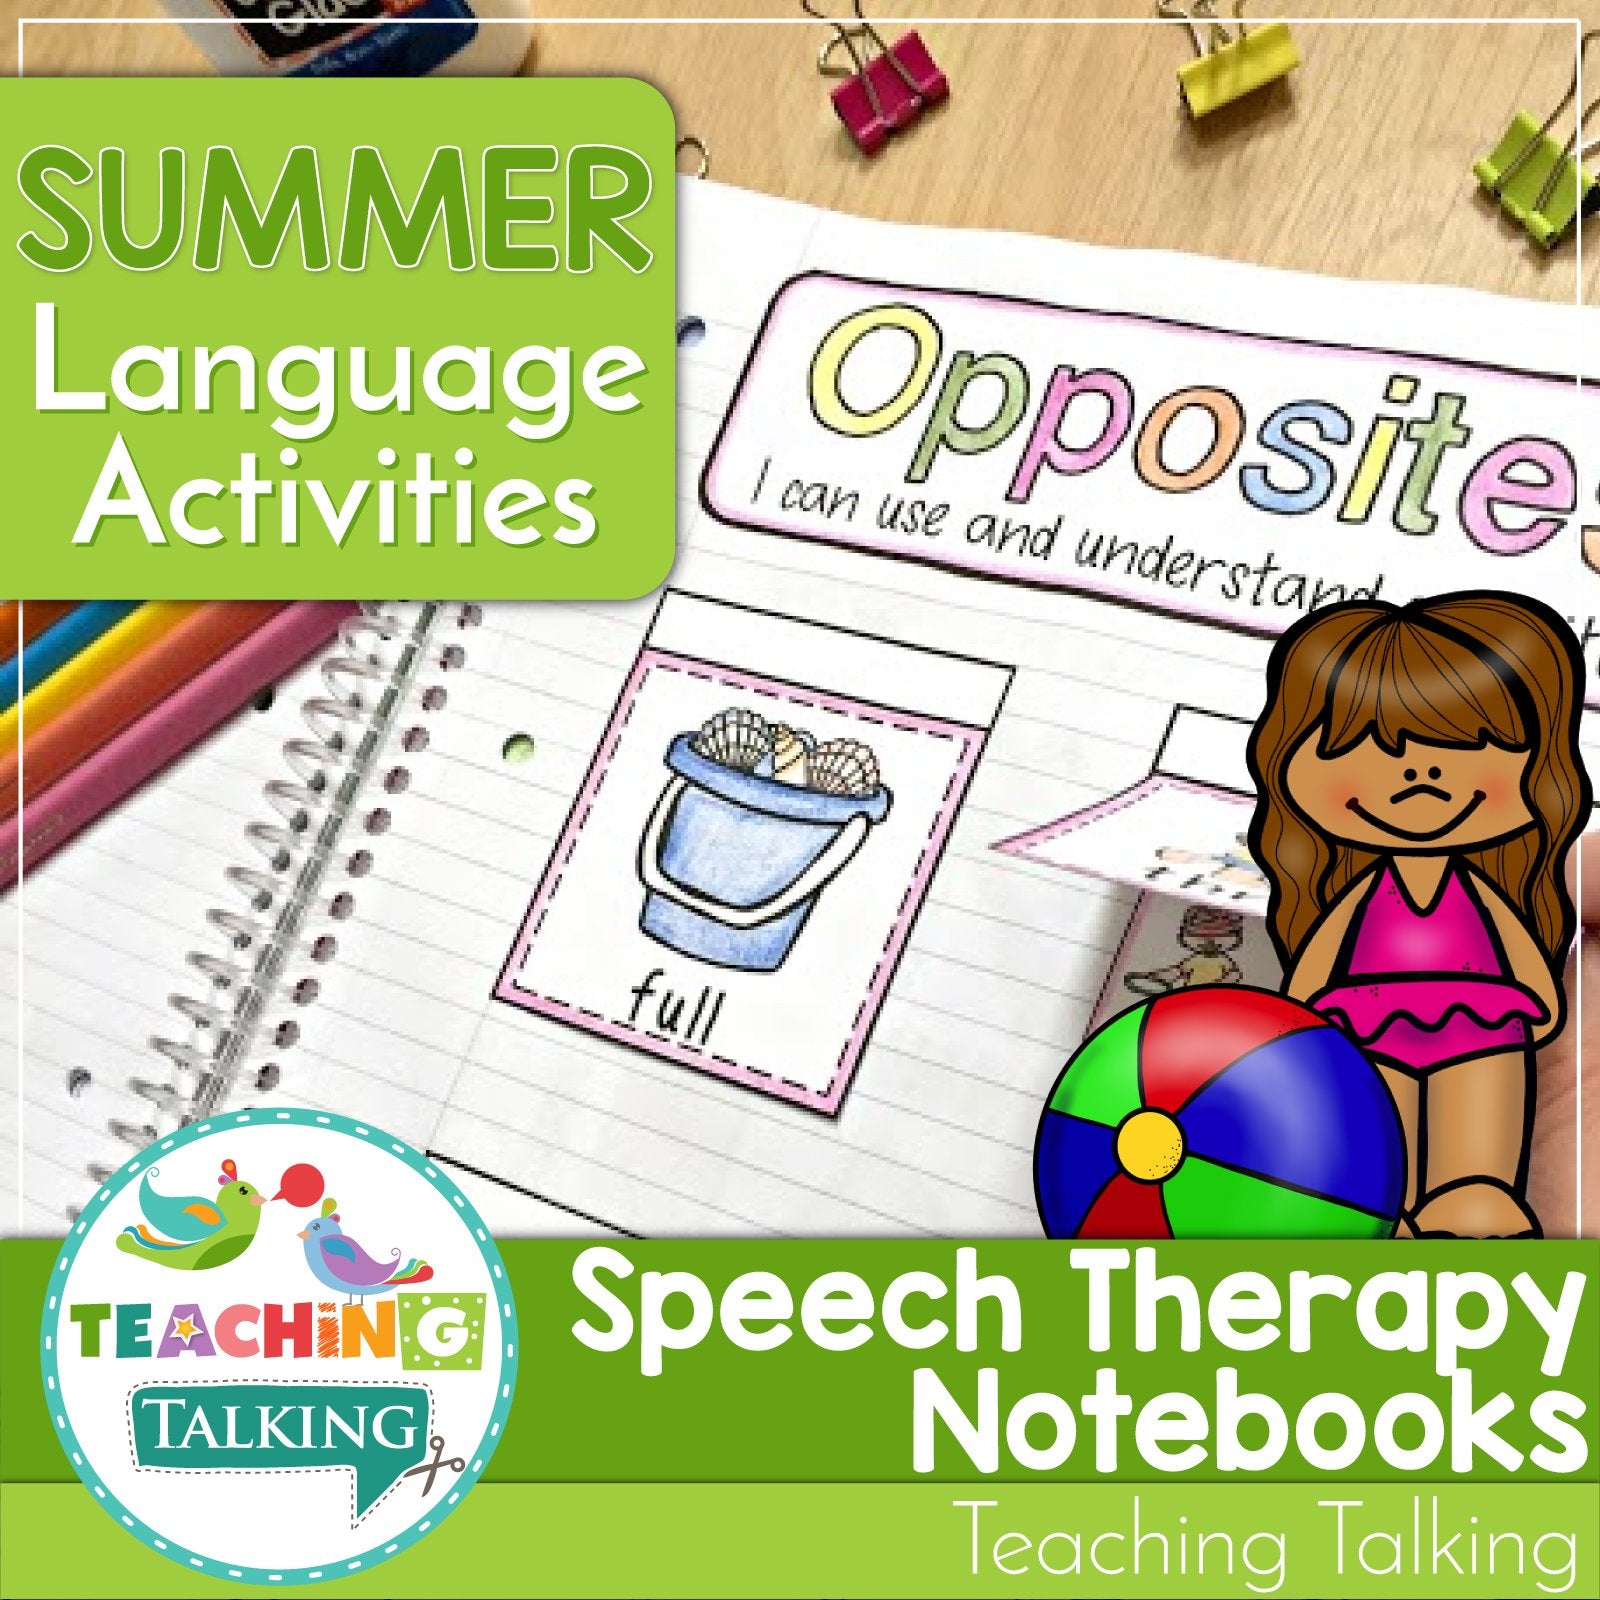 Teaching Talking Printable Speech Therapy Language Notebooks for Summer